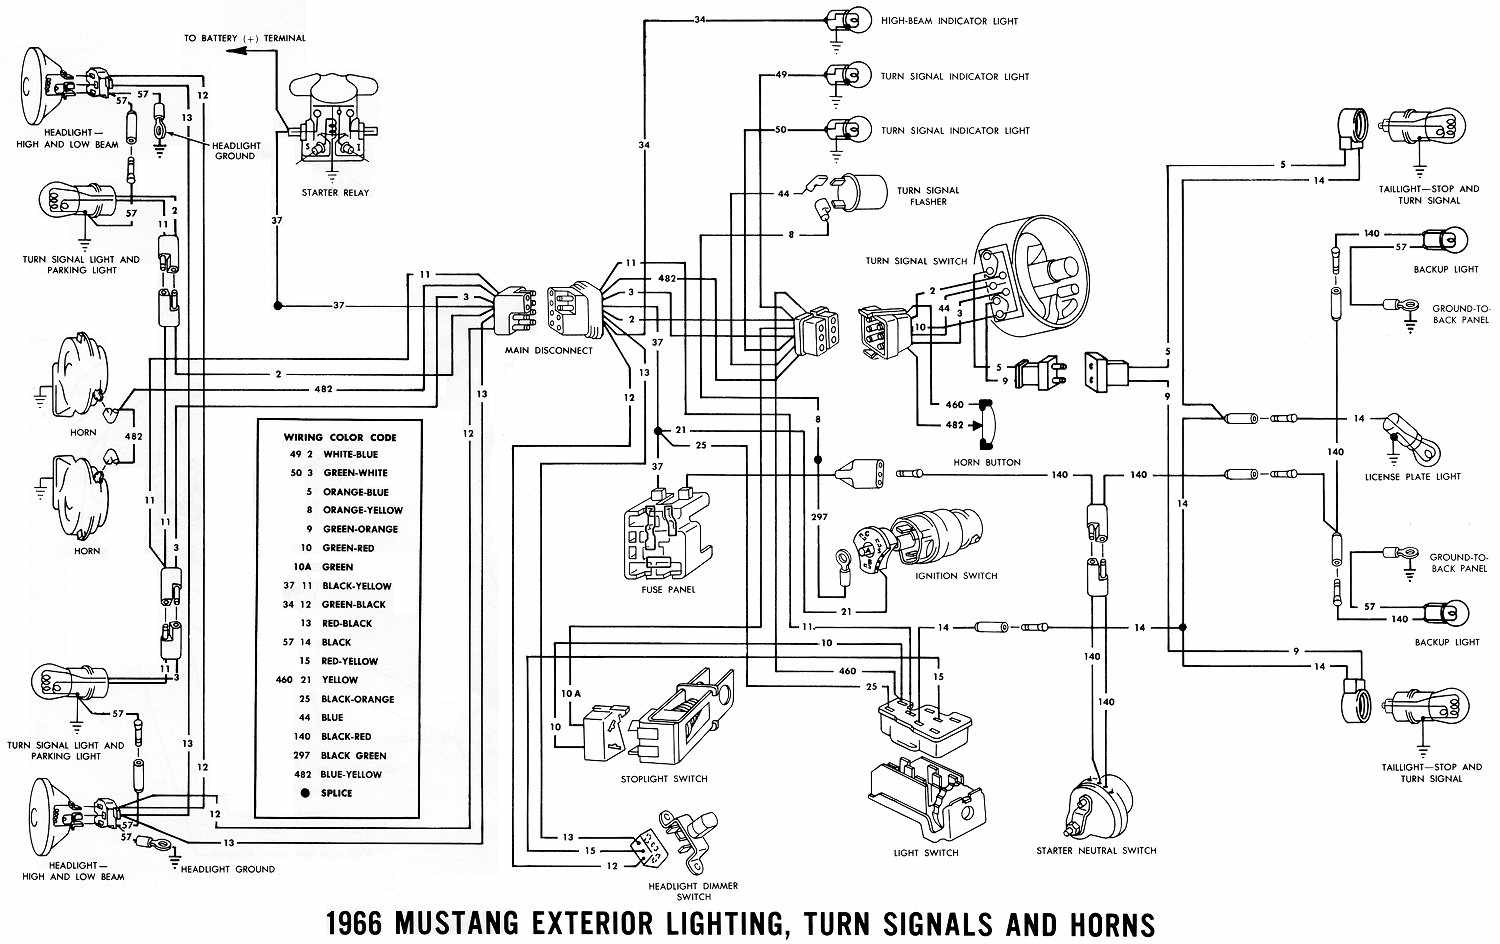 Exterior Light, Turn Signals, And Horns Wiring Diagrams Of 1966 Ford